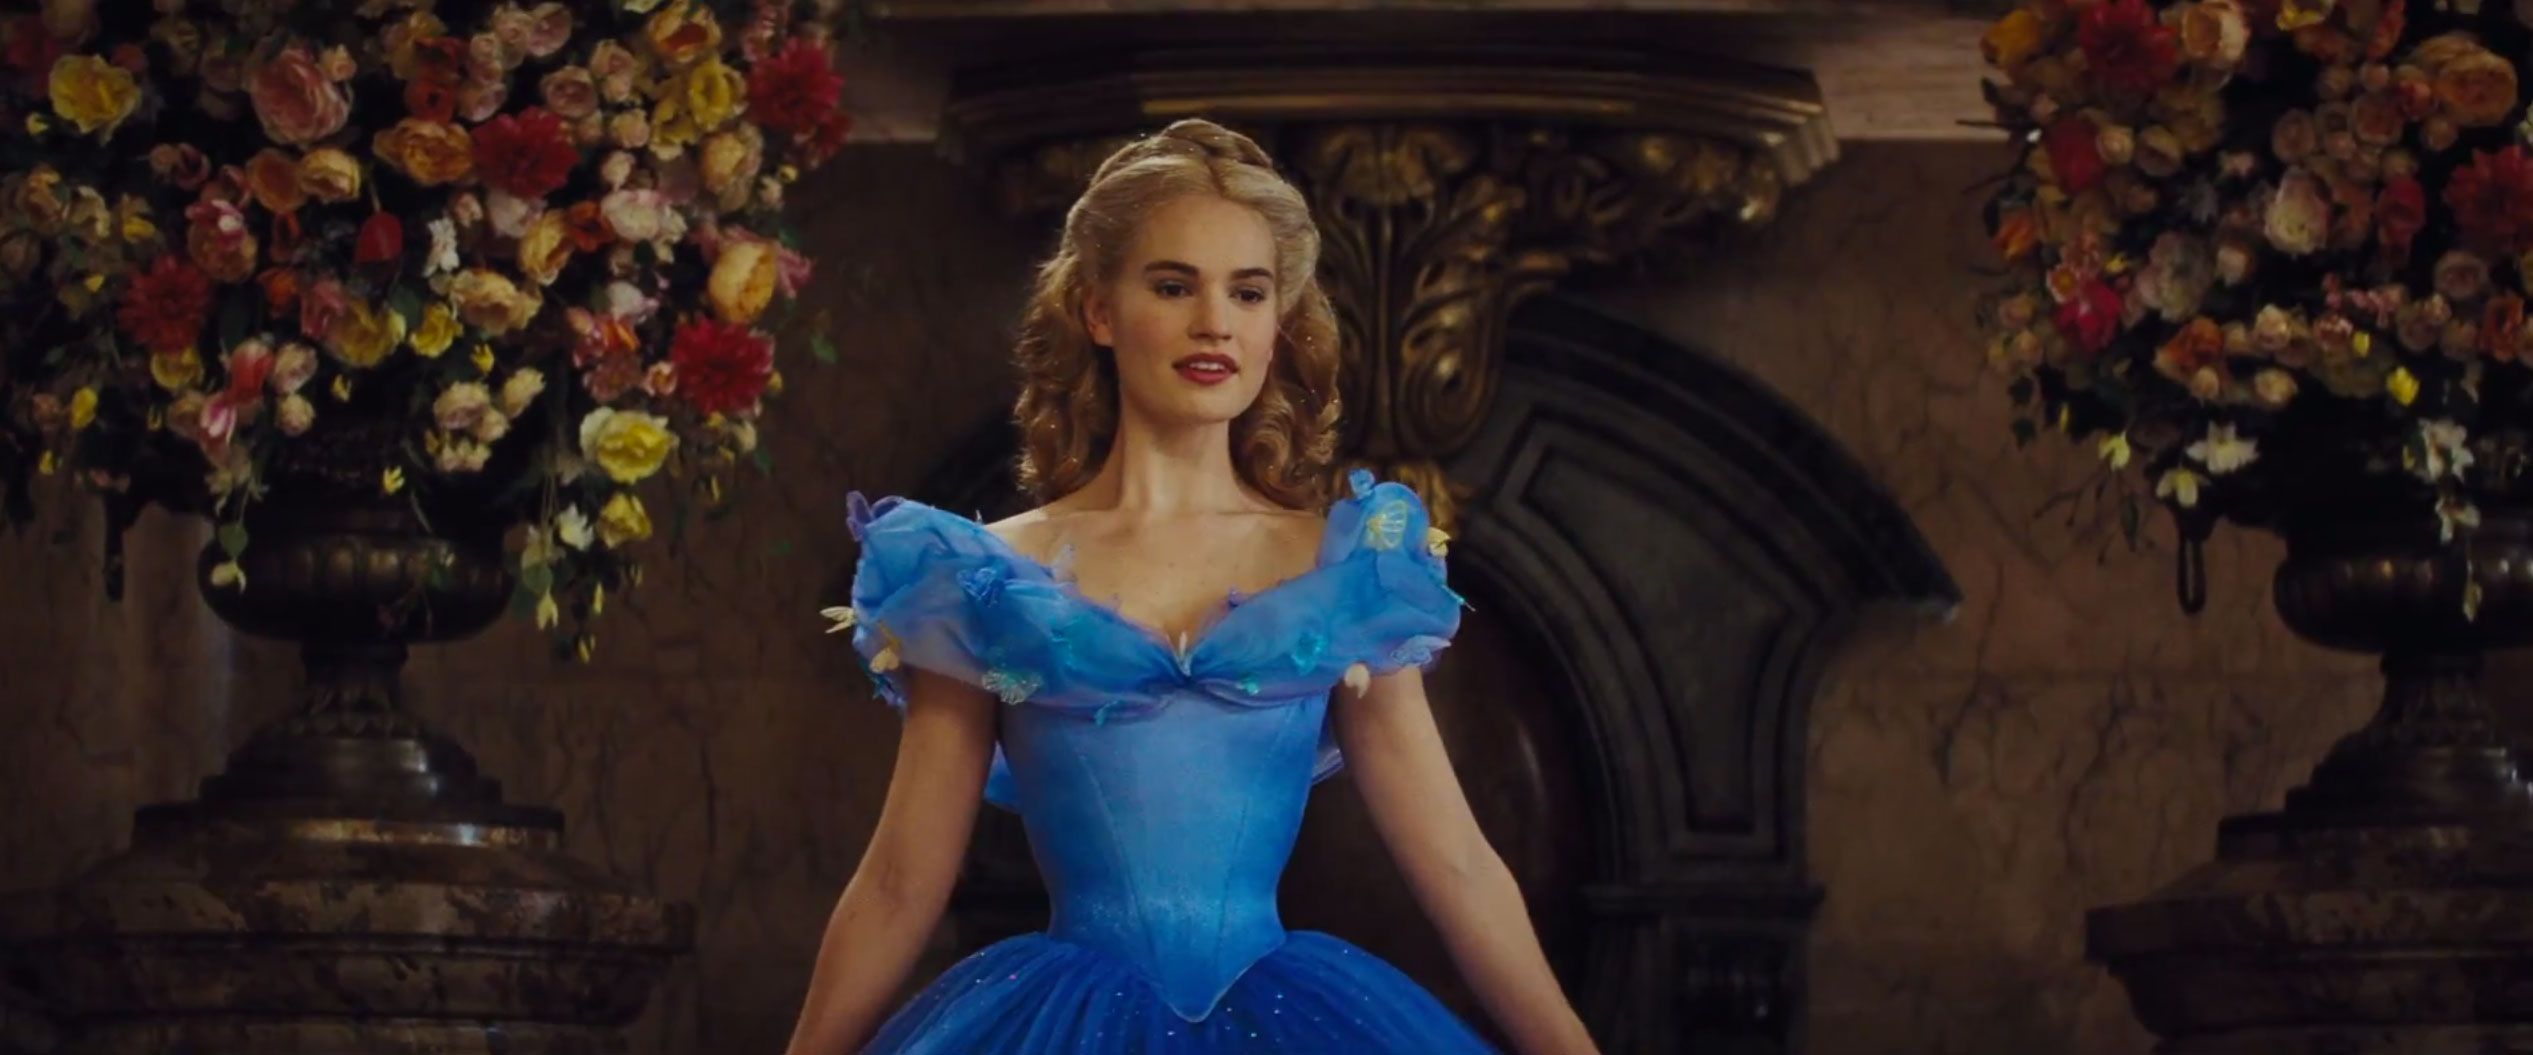 11 Amazing Things You Would Never Realize About The Cinderella Dress